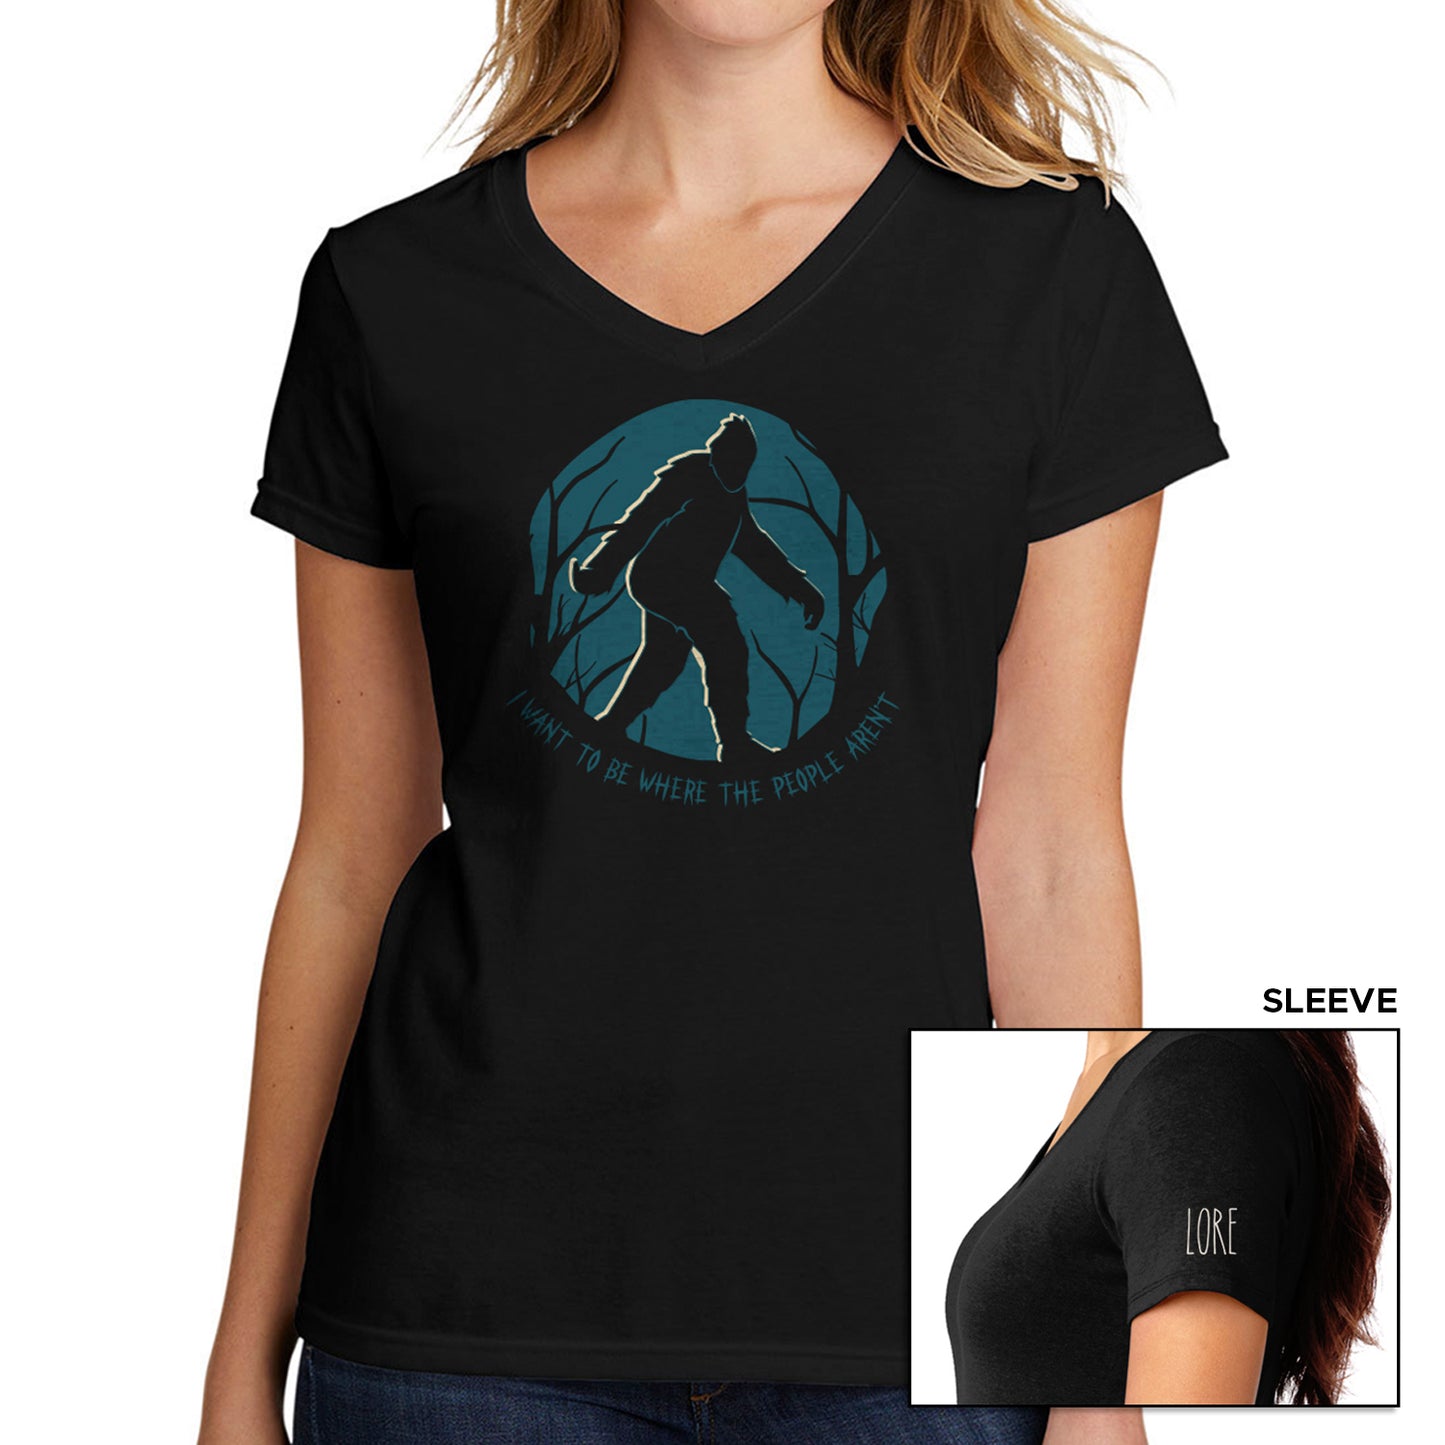 A female model wears a black v-neck t-shirt with an illustration of a bigfoot walking with a title adorning it that says "I want to be where the people aren't". The left shoulder has the word LORE written in white.